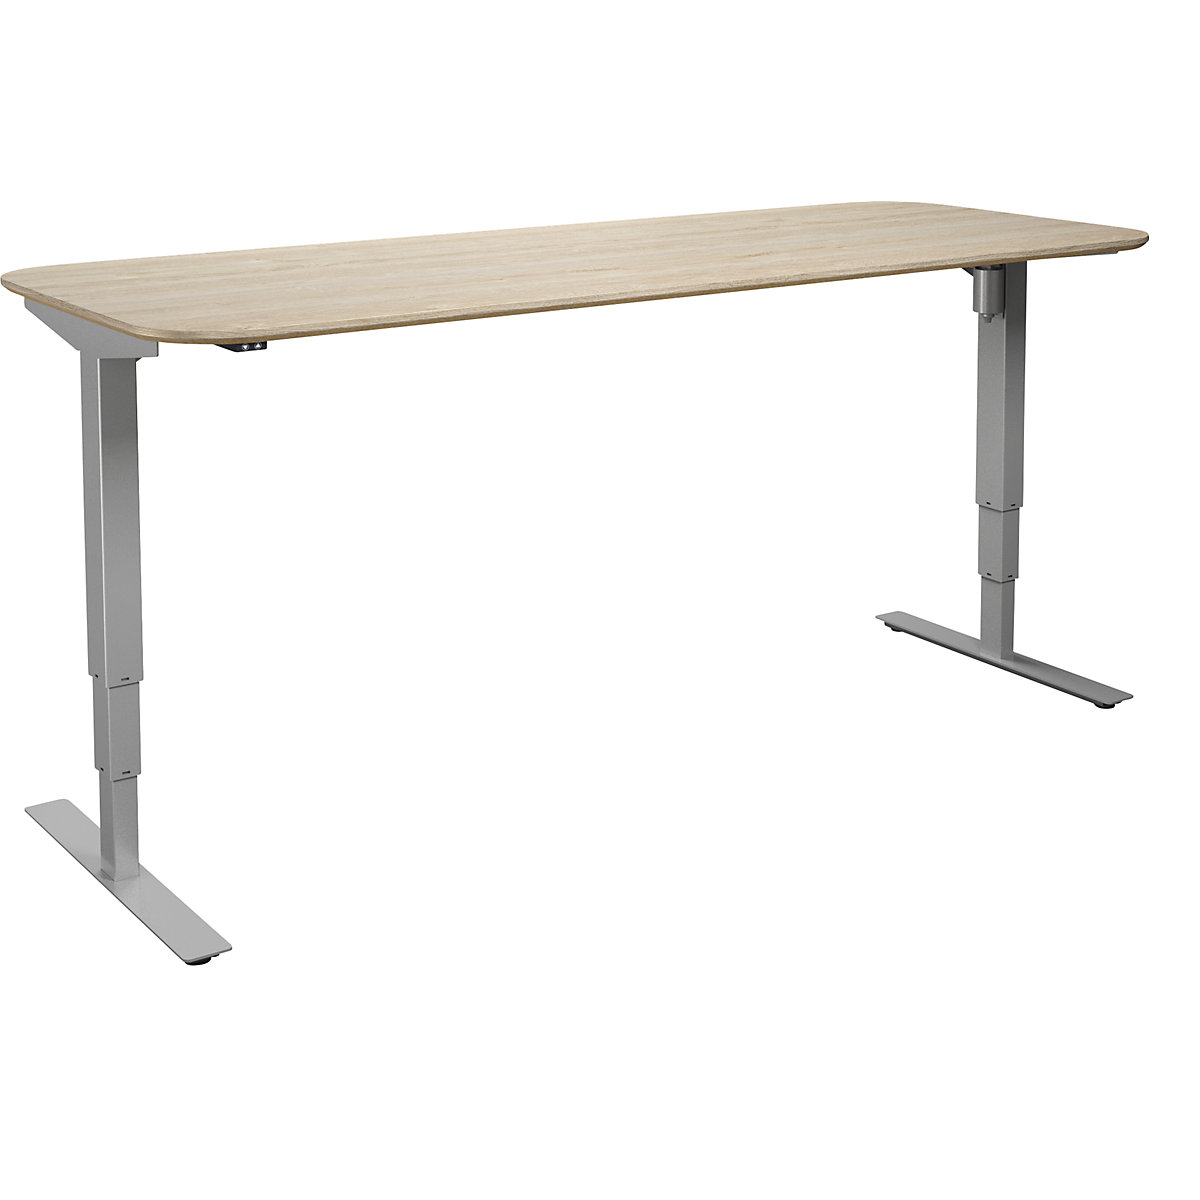 Atlanta Trend desk, electrically height adjustable, straight, rounded corners, WxD 1800 x 800 mm, oak/silver-16